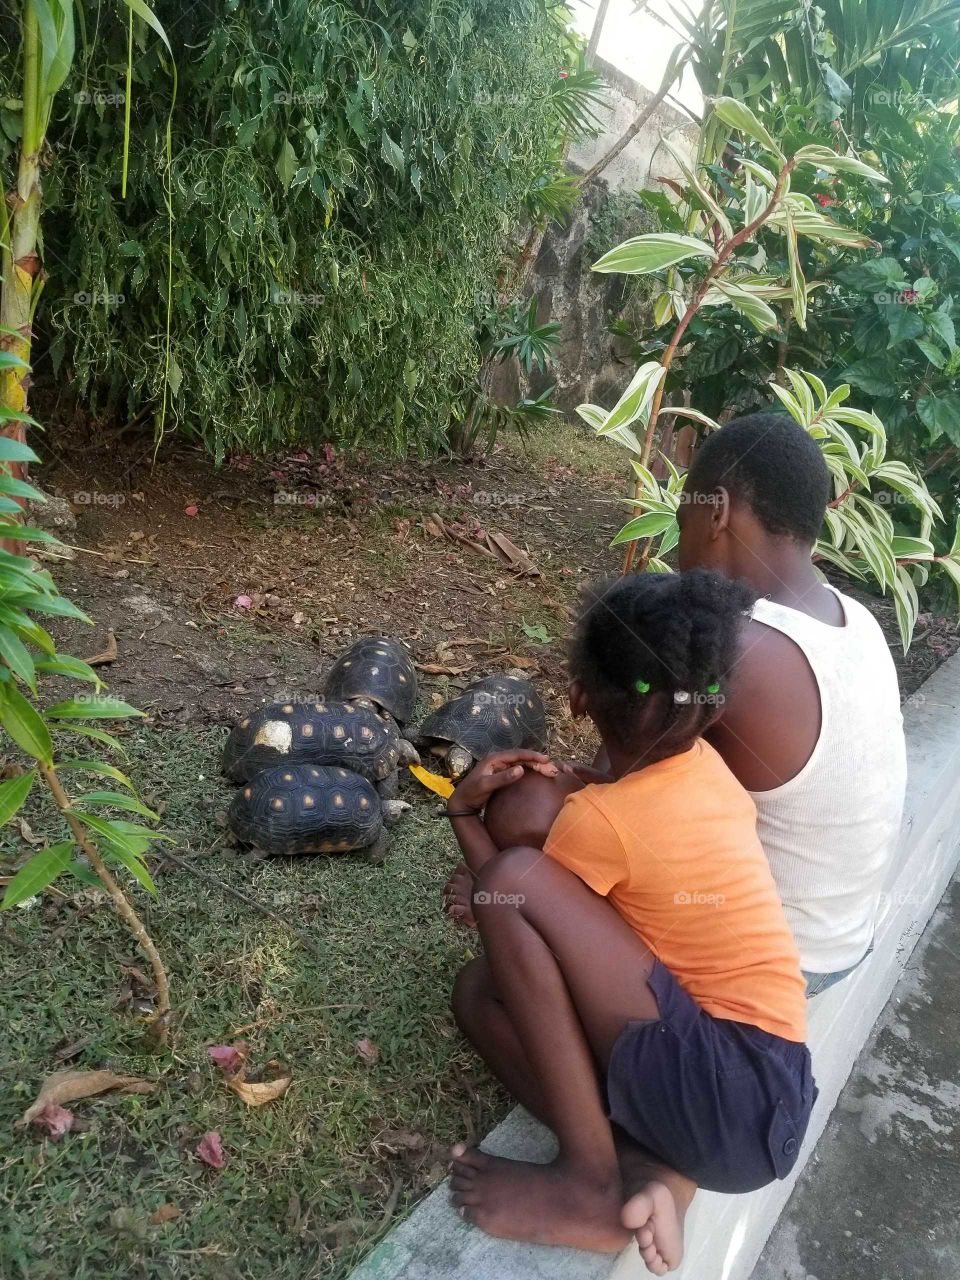 Feeding the turtles in Bequia